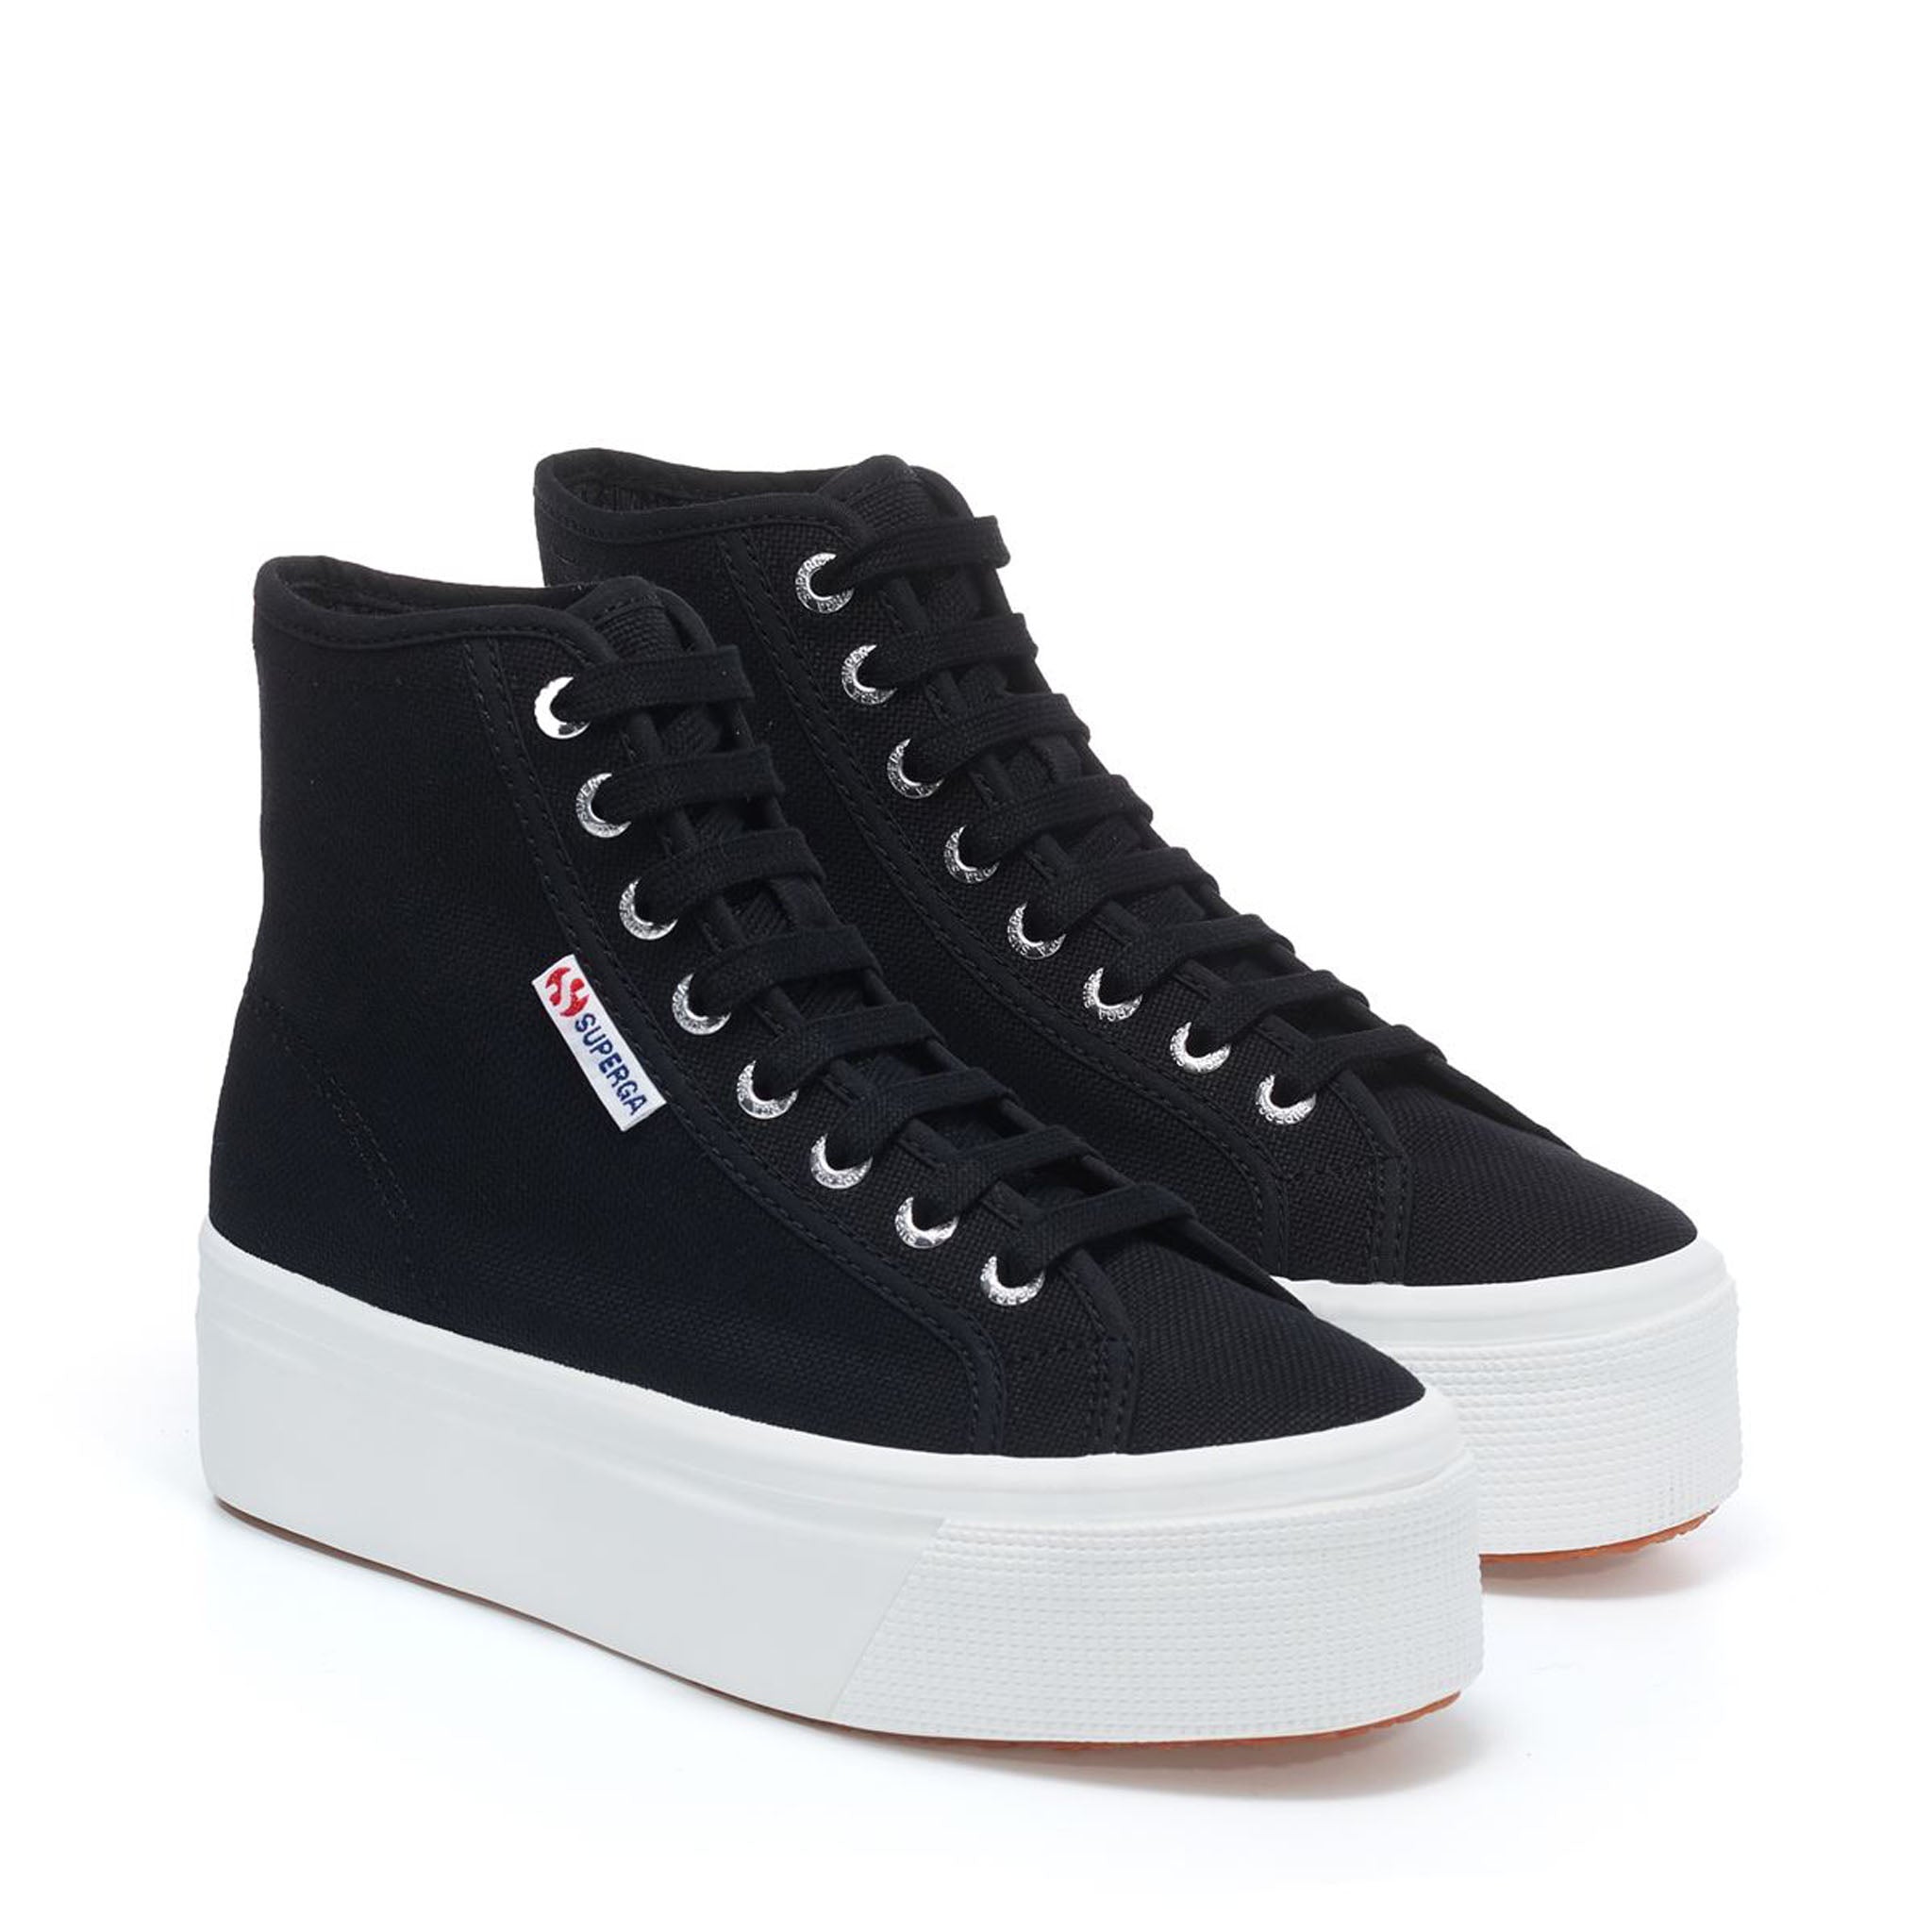 Superga 2708 High Top Sneakers - Black. Front view.